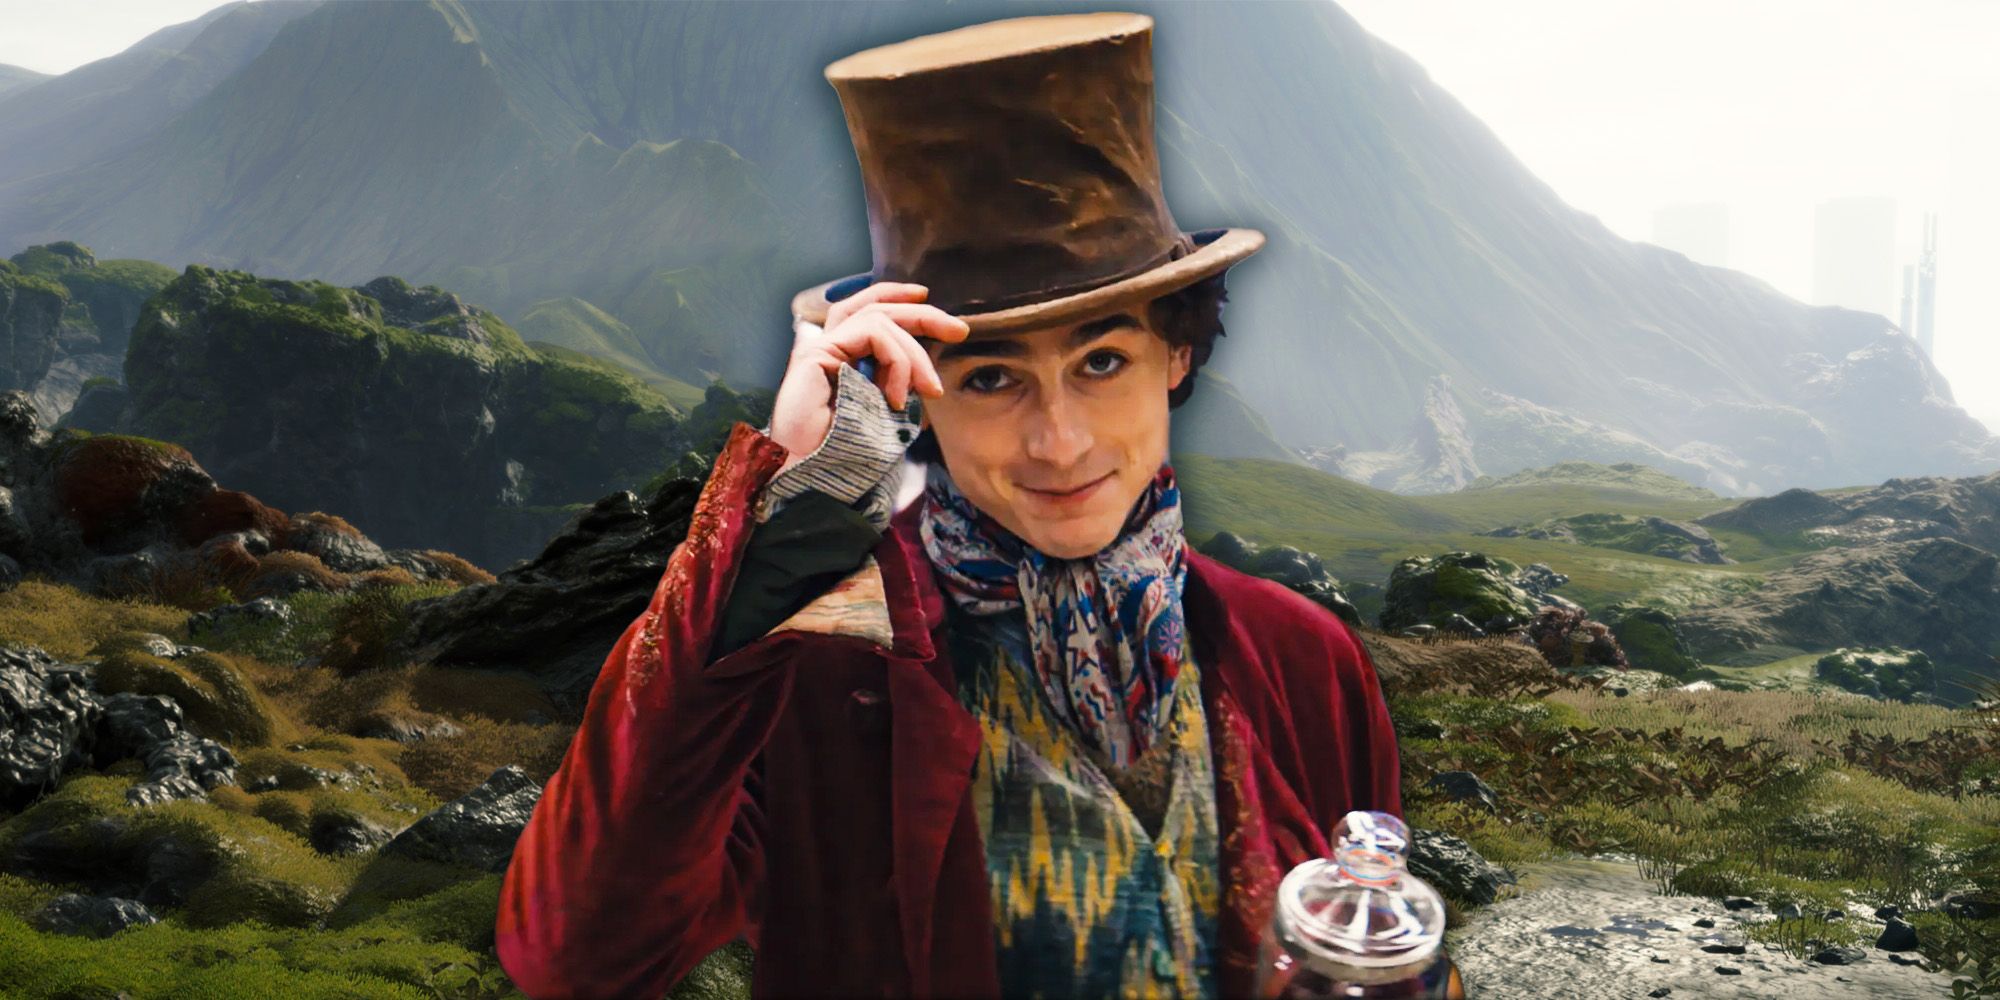 Timothée Chalamet in Wonka gear, with Death Stranding scenery in the background.